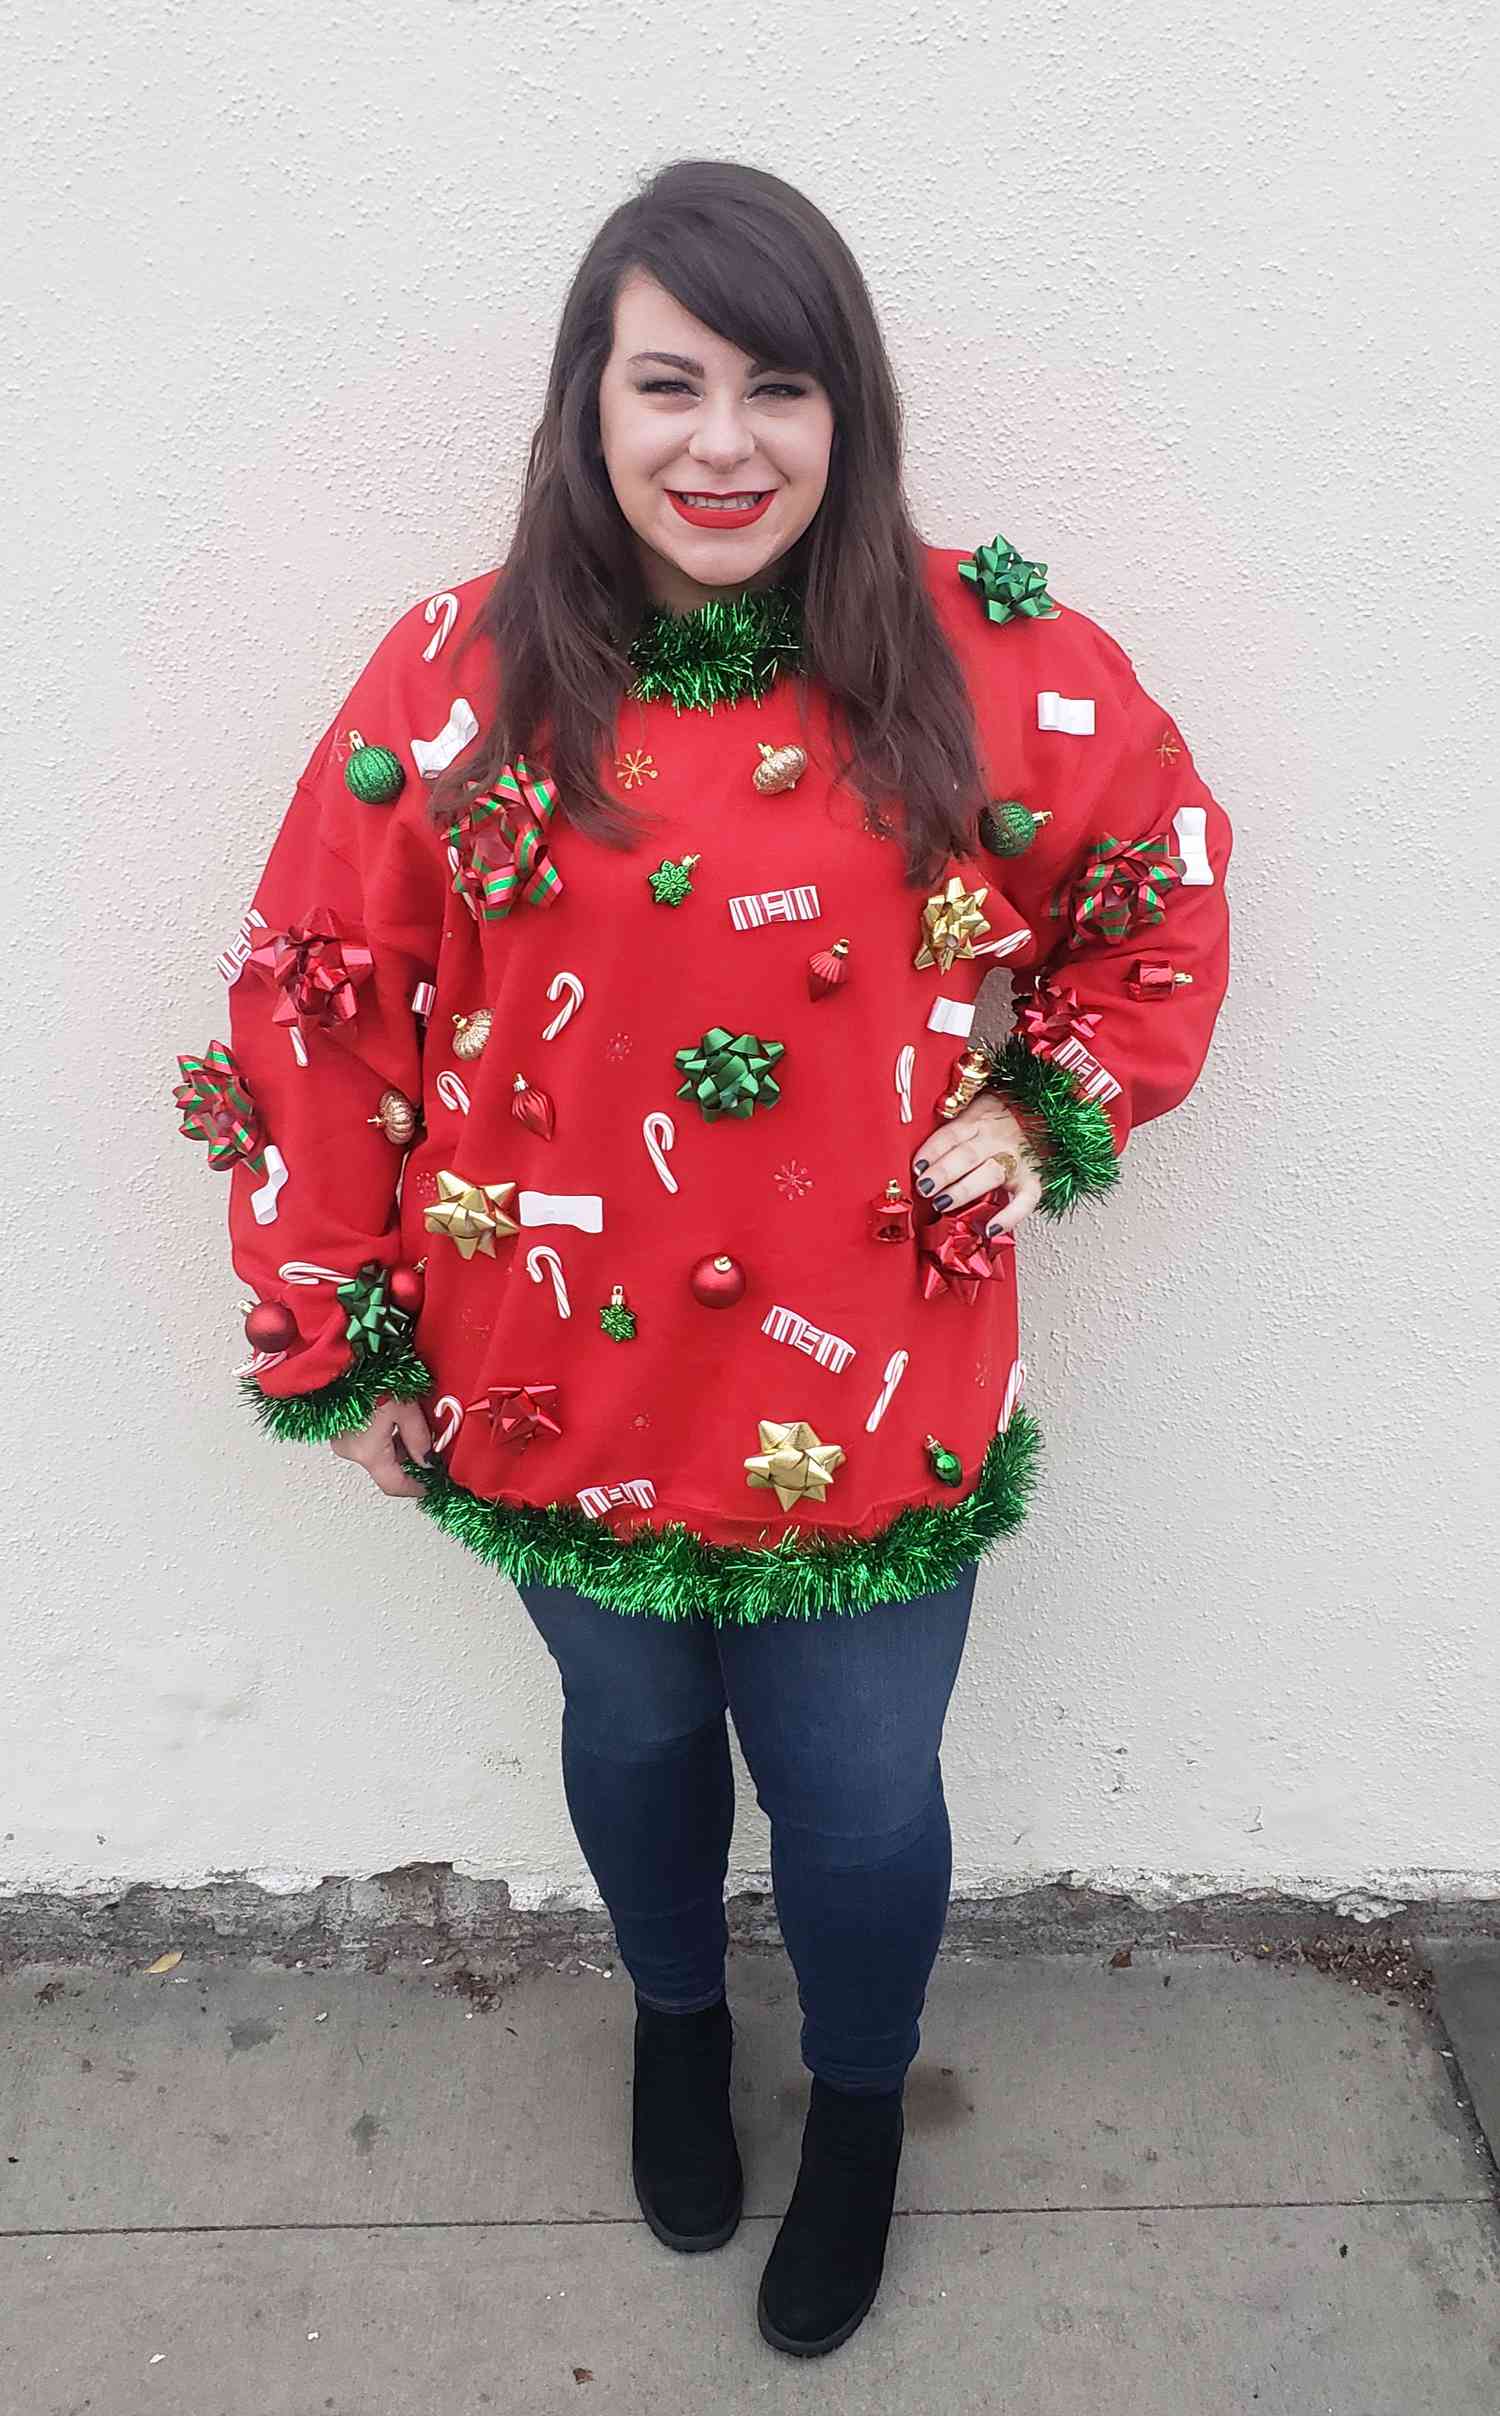 How To Make Ugly Christmas Sweaters?